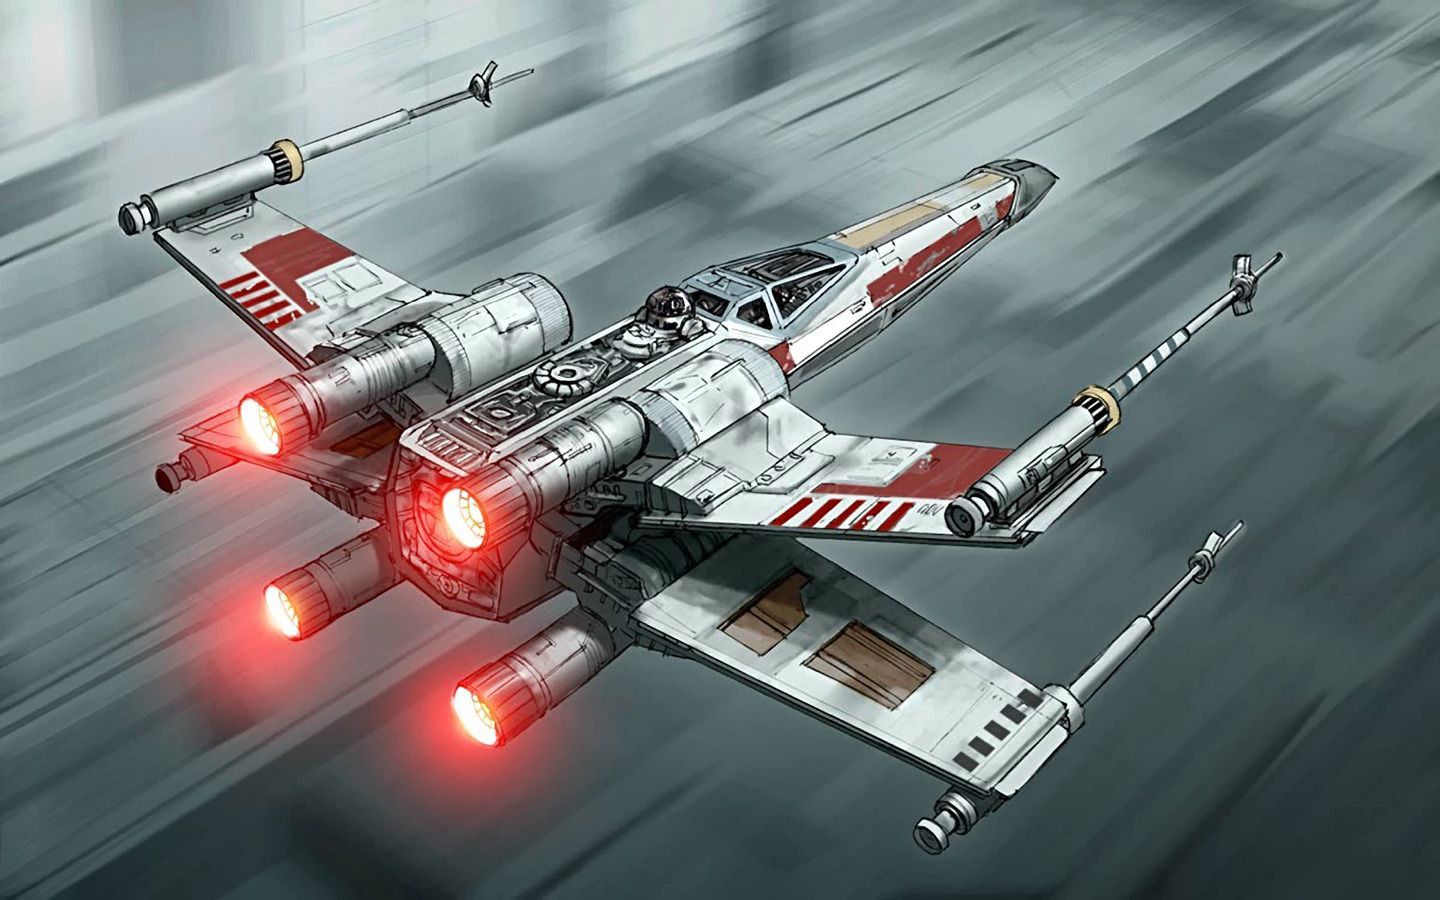 Download HD Wallpaper Of 28337 Fantasy Art, Star Wars, X Wing. Free Download High Quality And Widescre. Star Wars Painting, Star Wars Wallpaper, X Wing Wallpaper